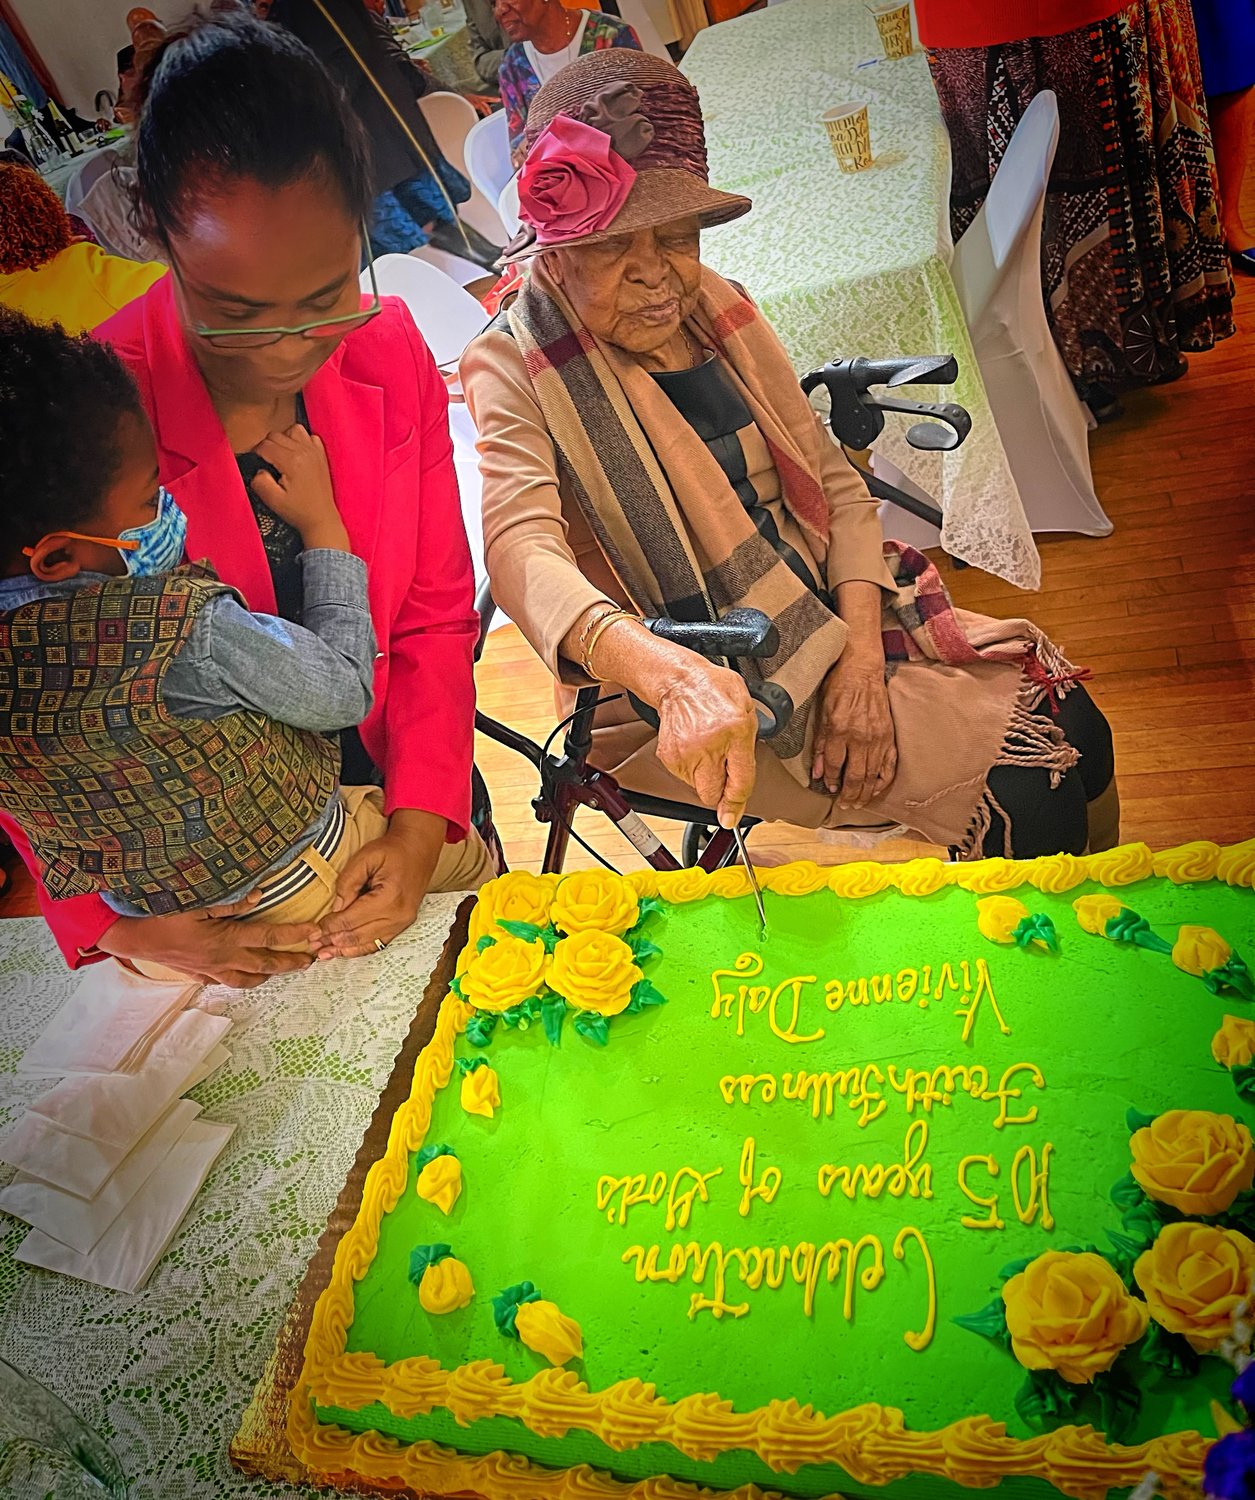 Vivienne Daly, of Baldwin, celebrated her 105th birthday last week with fellow members of the All Saints Episcopal Church.